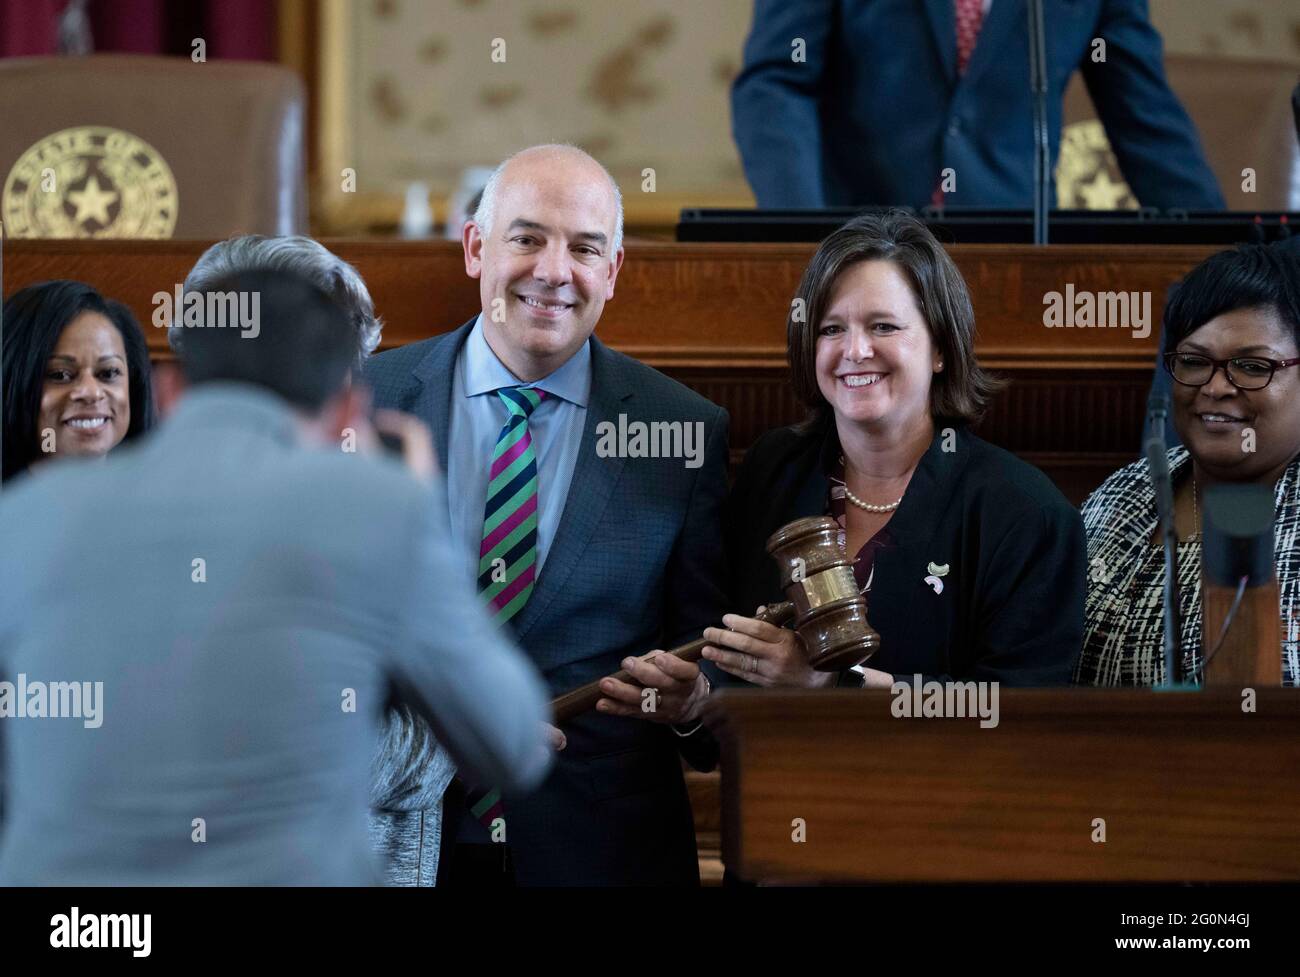 House Democratic Caucus leader Chris Turner, D-Grand Prairie, poses with Rep. Ann Johnson, D-Houston, who received a gavel as the Freshman of the Year on the final day of the 87th Texas Legislature. Stock Photo